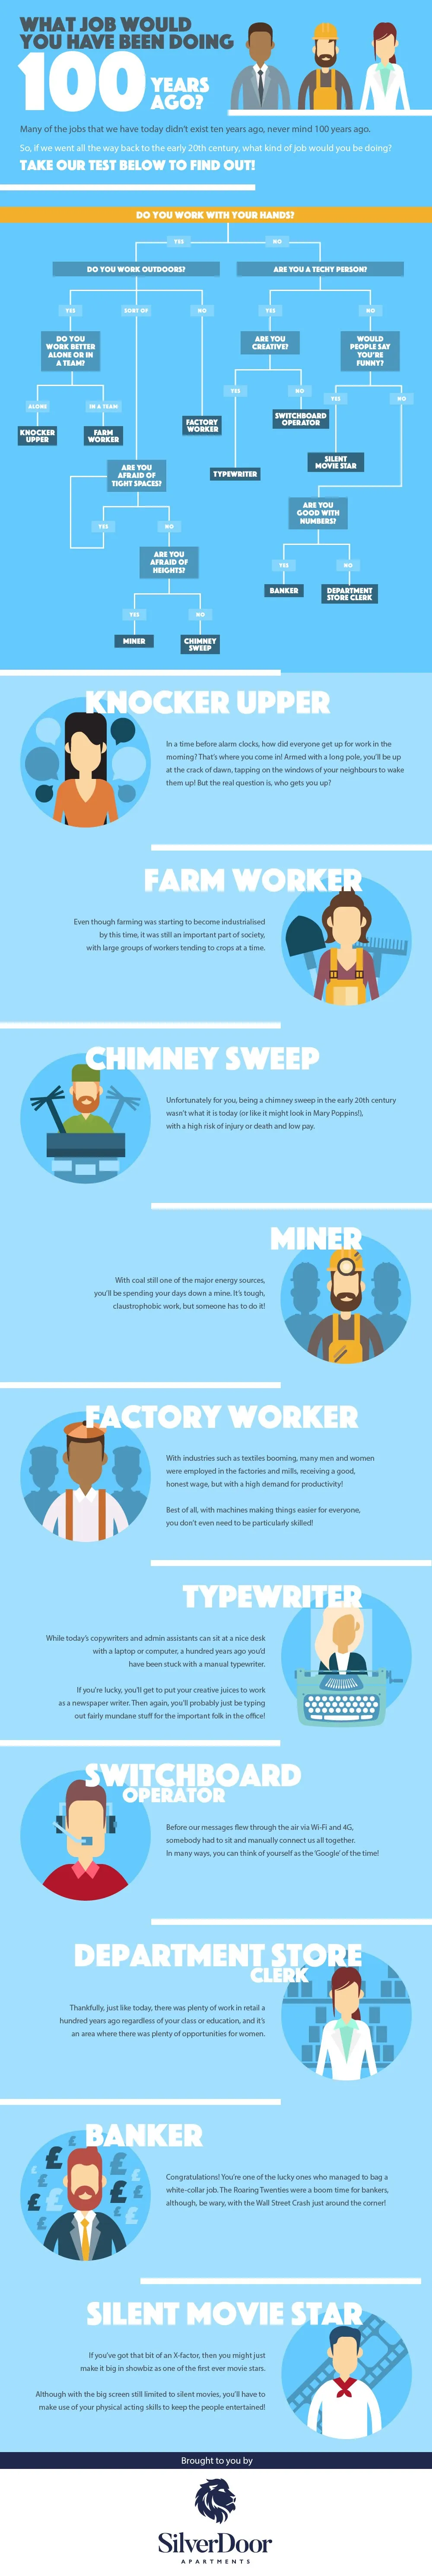 What Job Would You Have Been Doing 100 Years Ago? - #infographic